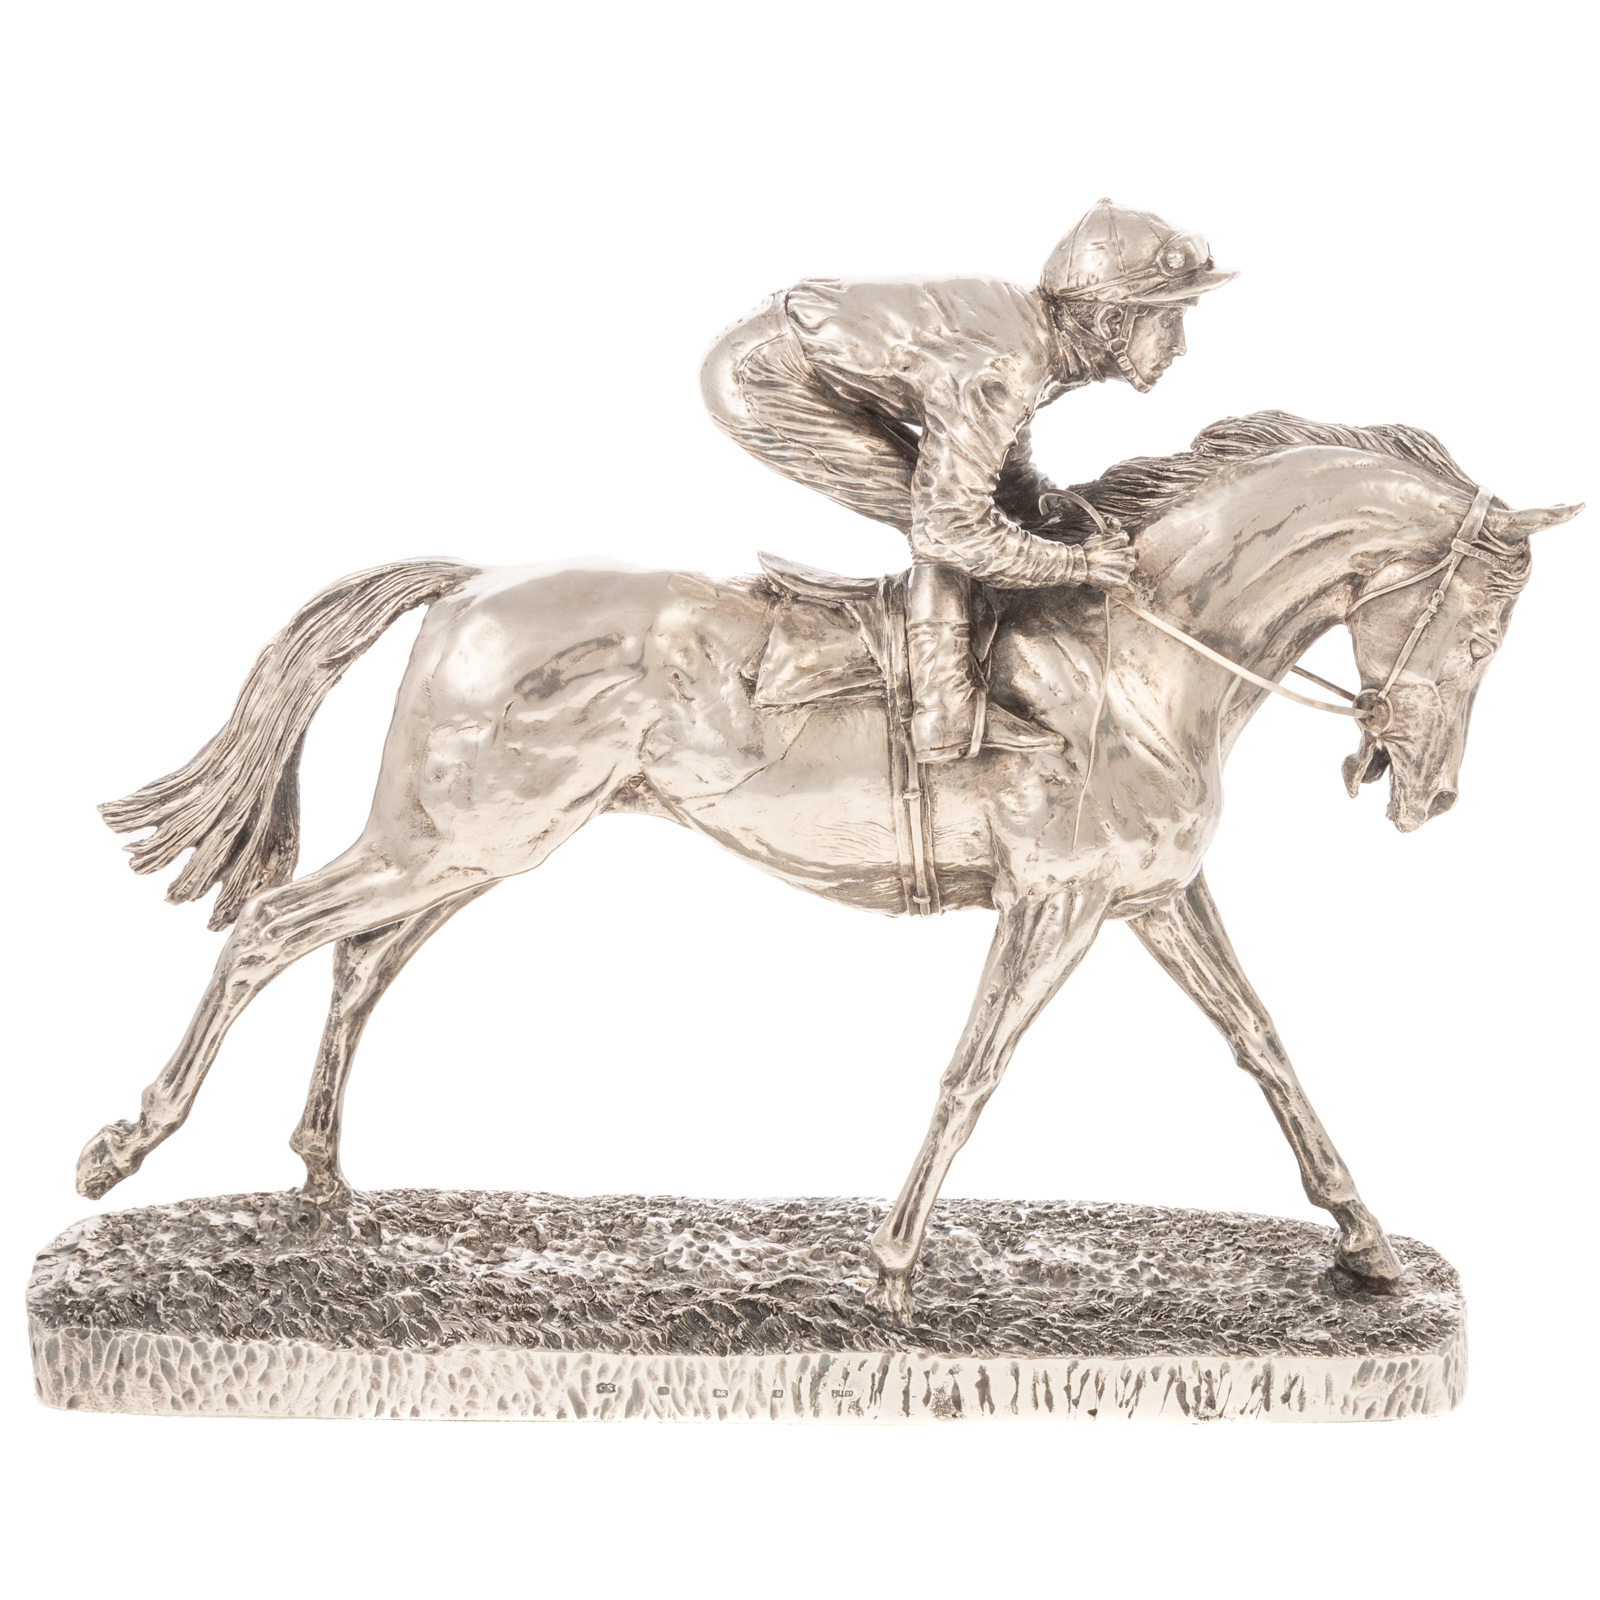 ENGLISH STERLING FIGURE OF A HORSE